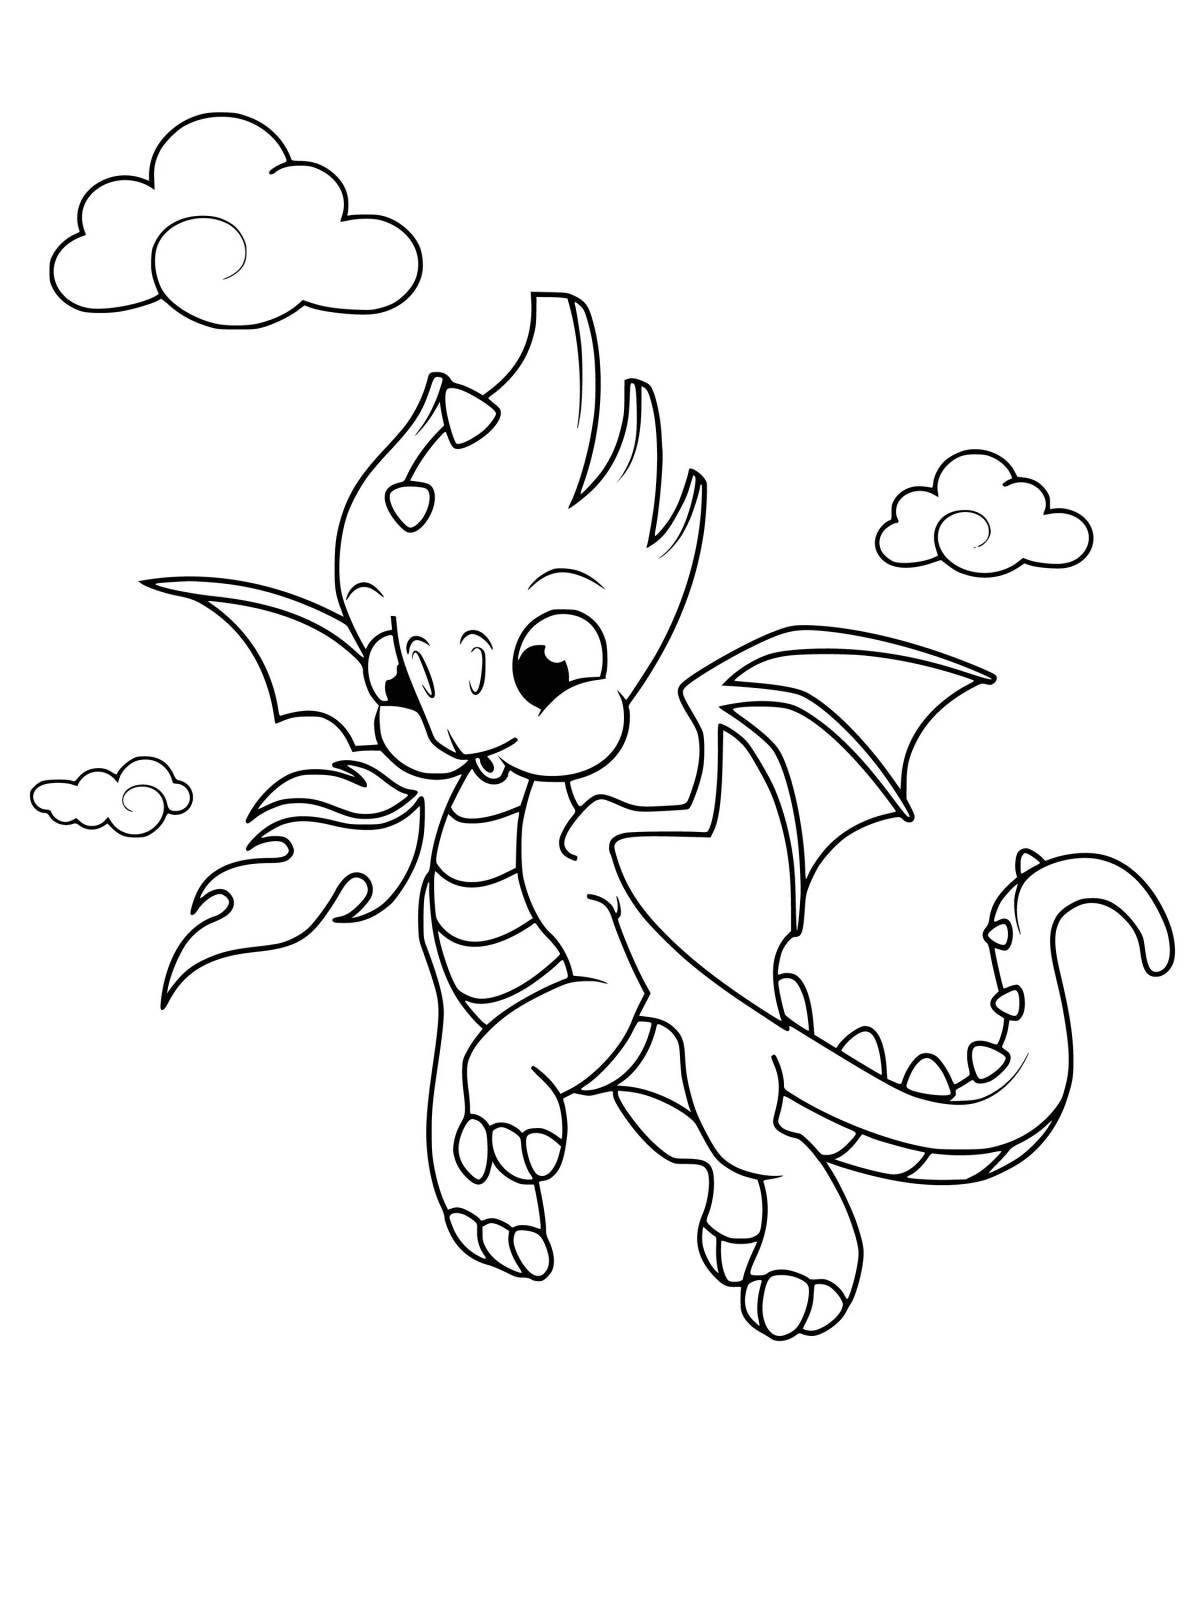 Elegant coloring dragons for children 6-7 years old